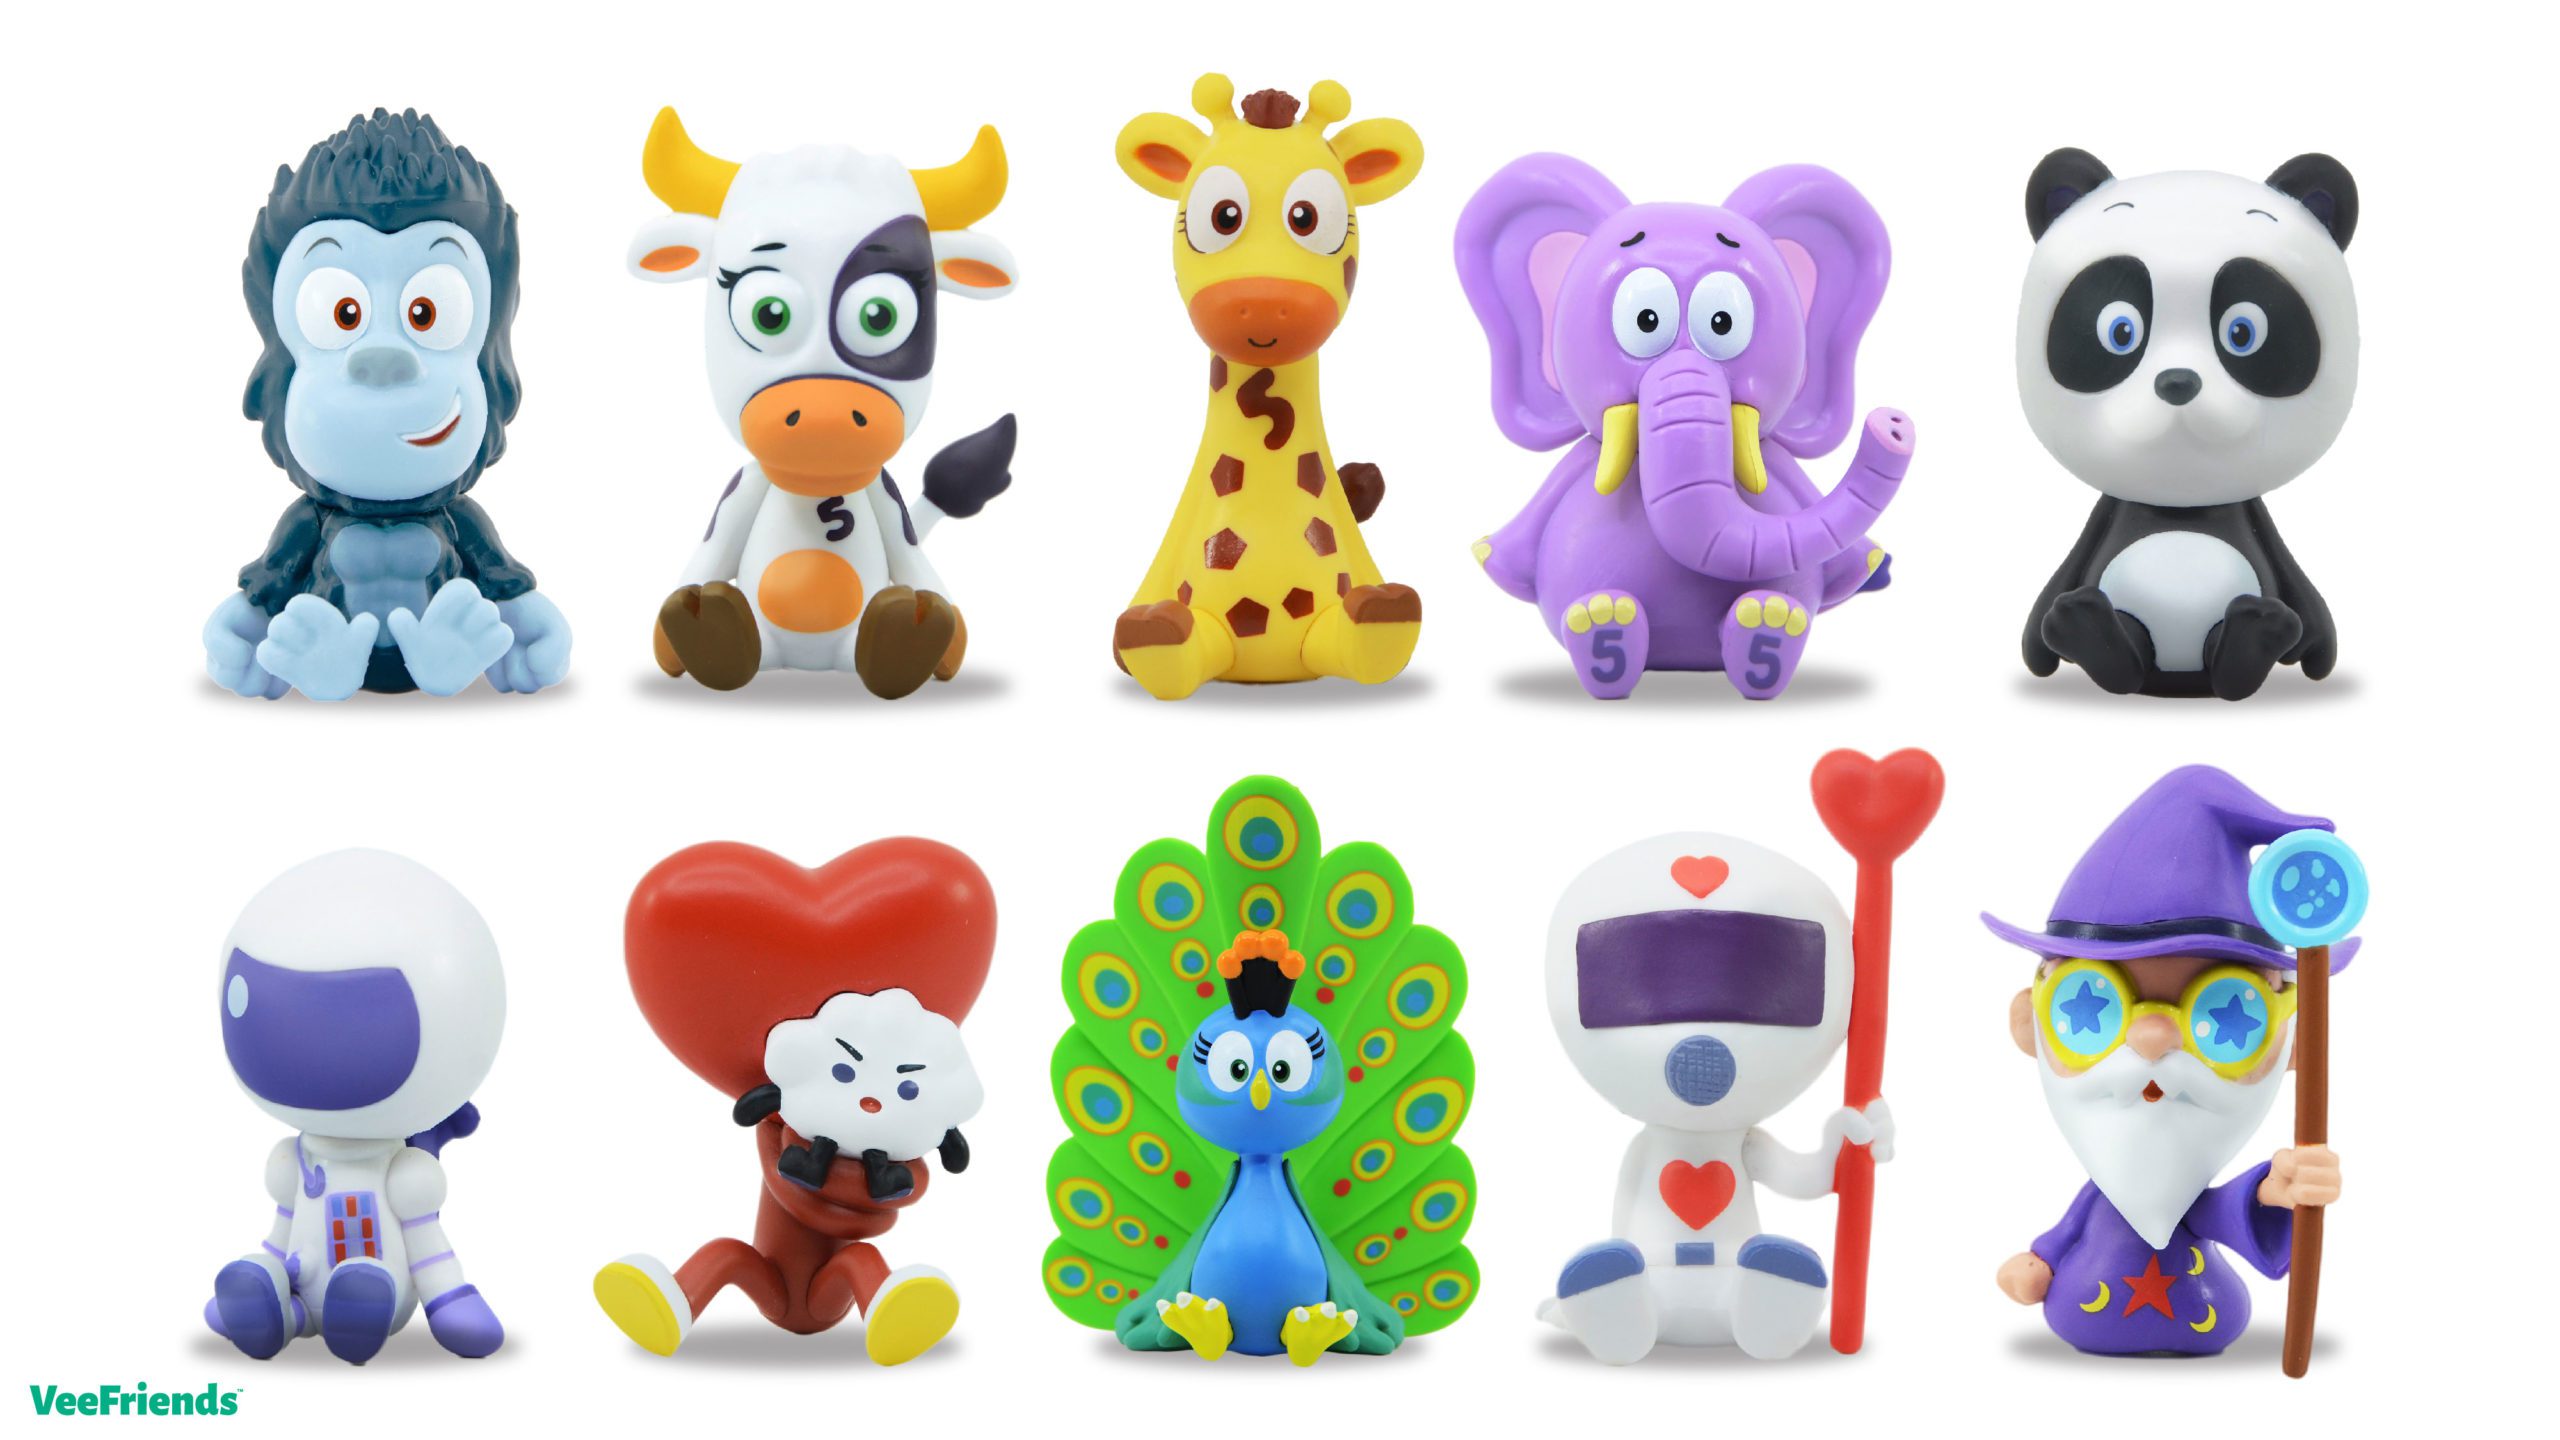 VeeFriends Launches Collectible Characters